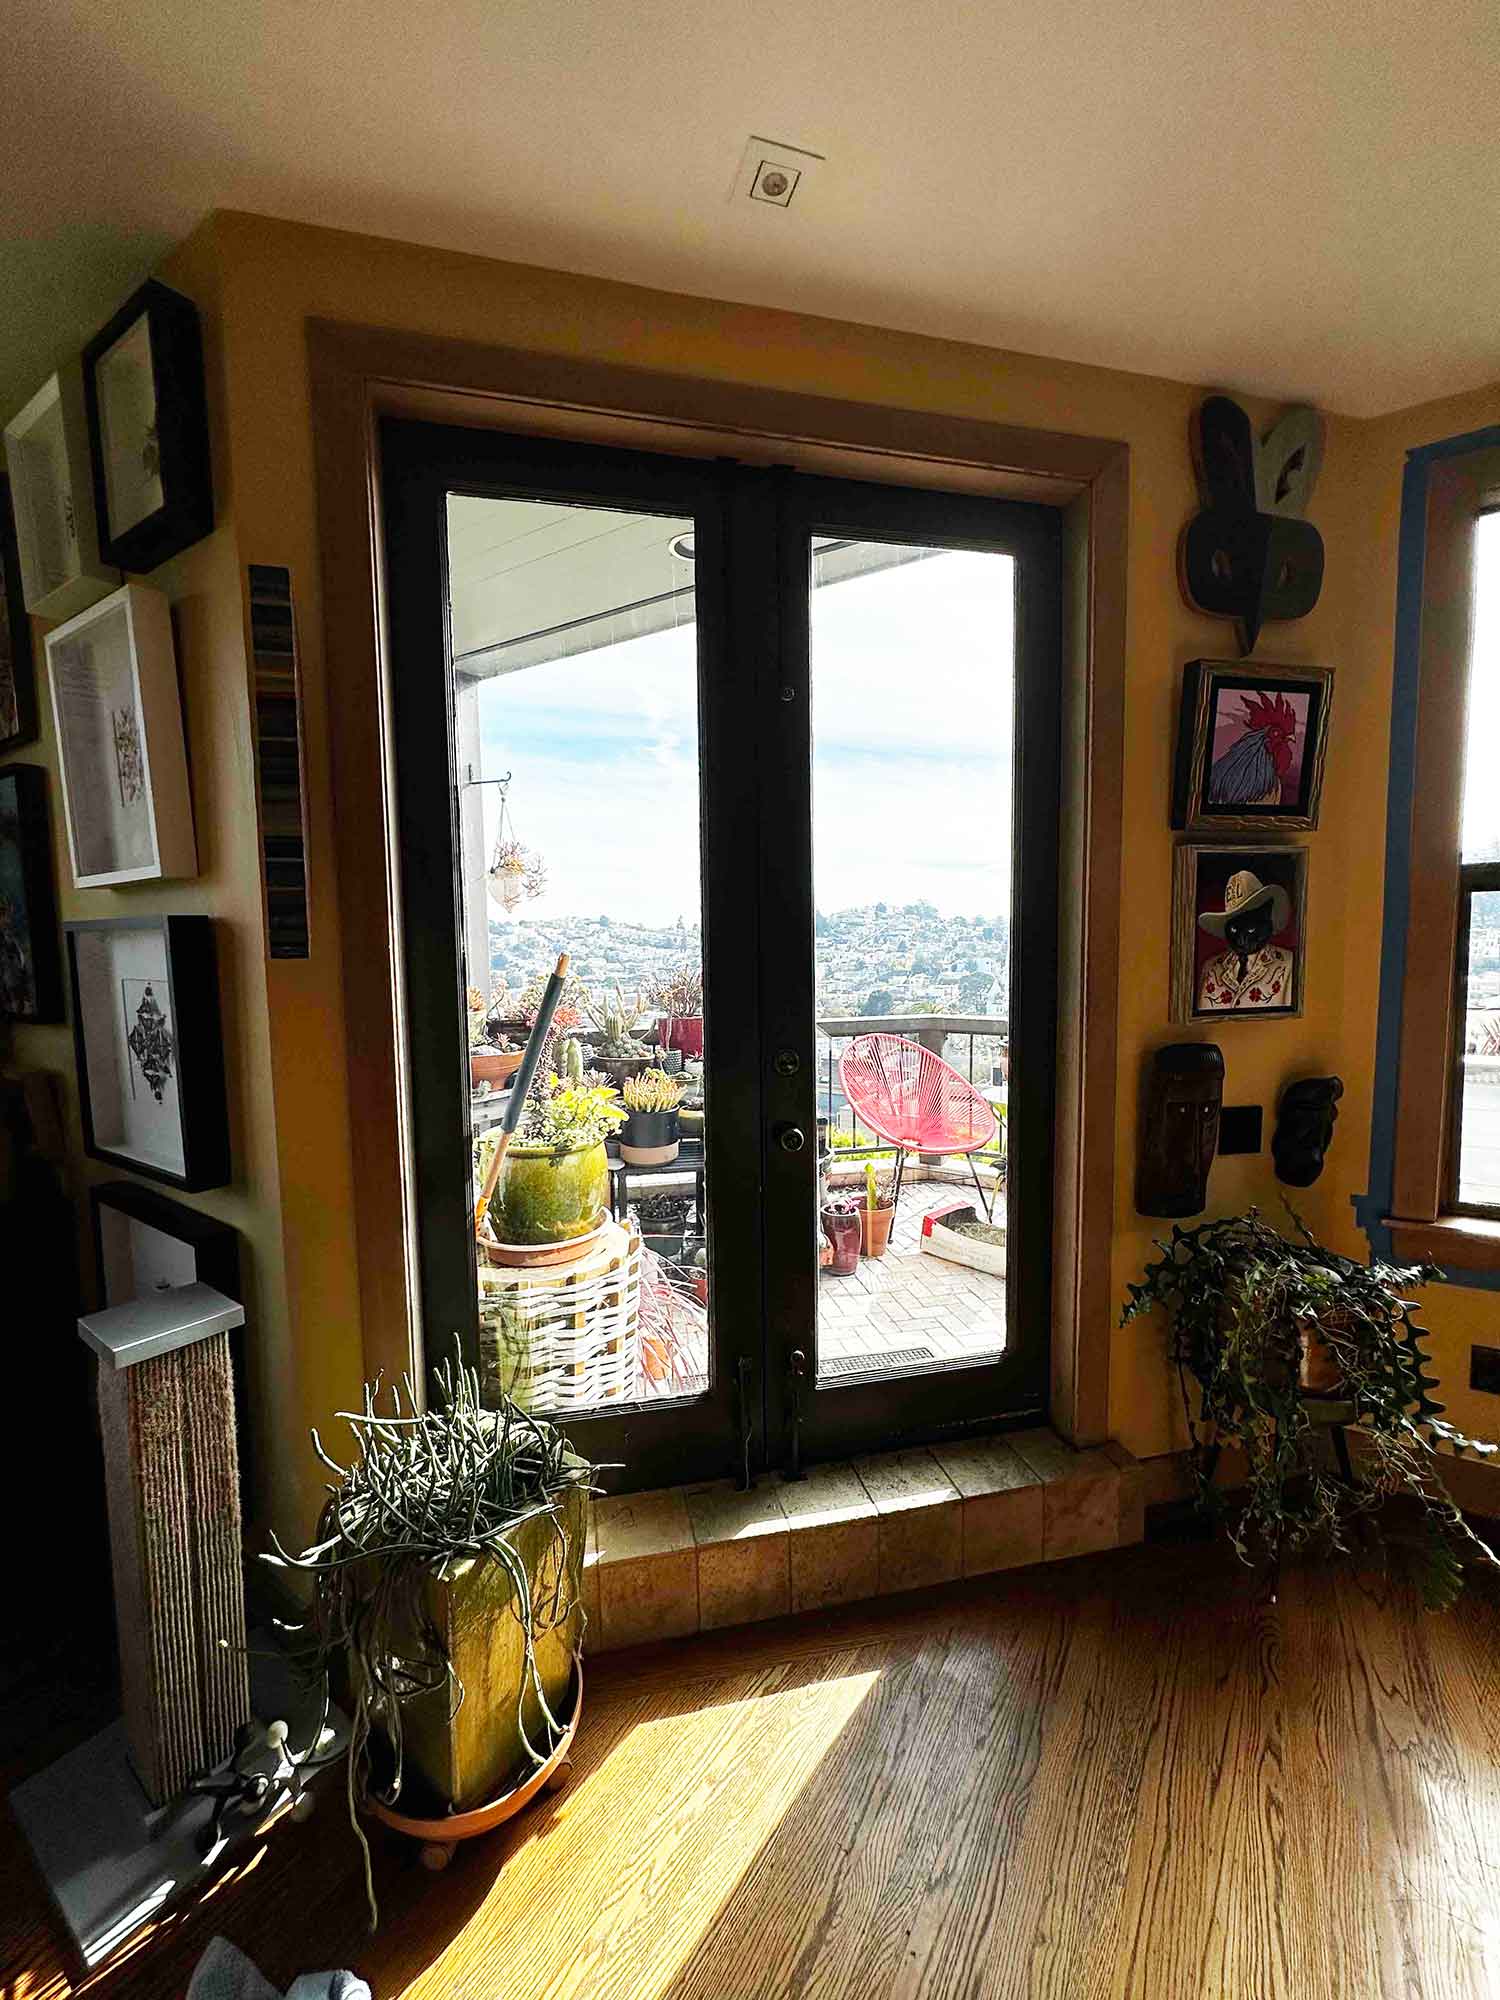 Can window film protect art from fading? Yes it can! We added window film to this art lover's home in San Francisco, CA.